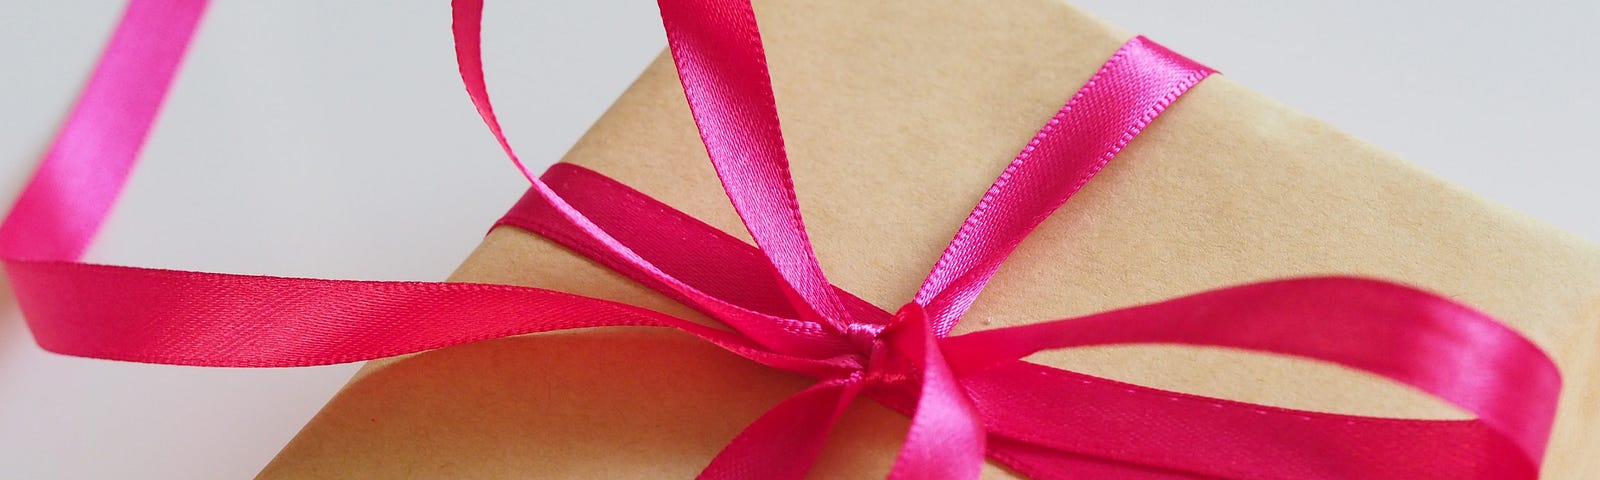 An image of a gift box wrapped in brown paper with a fushia ribbon tied into a bow on the top.